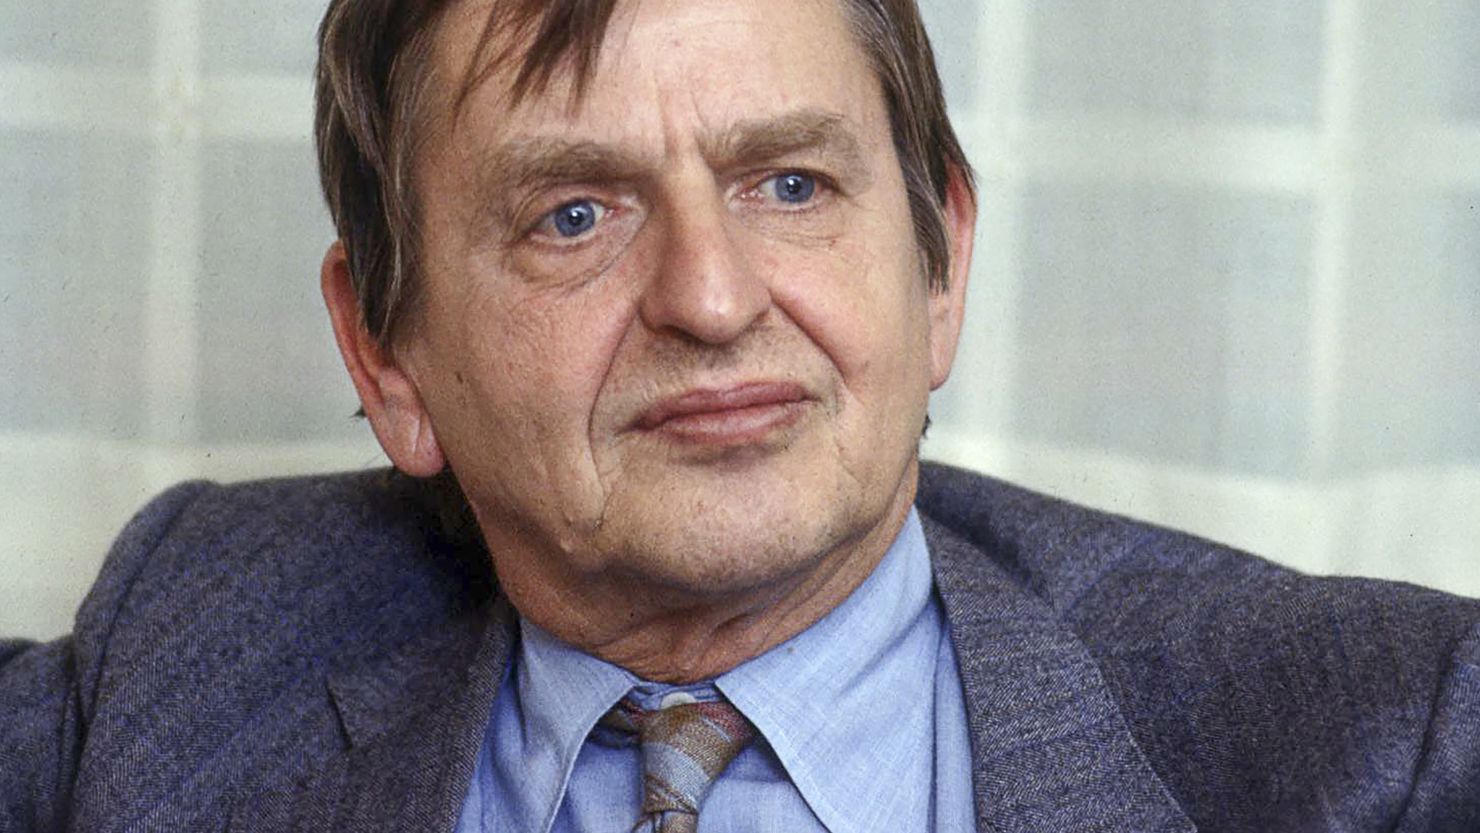 Swedish Prime Minister Olof Palme was assassinated on a Stockholm street in 1986.